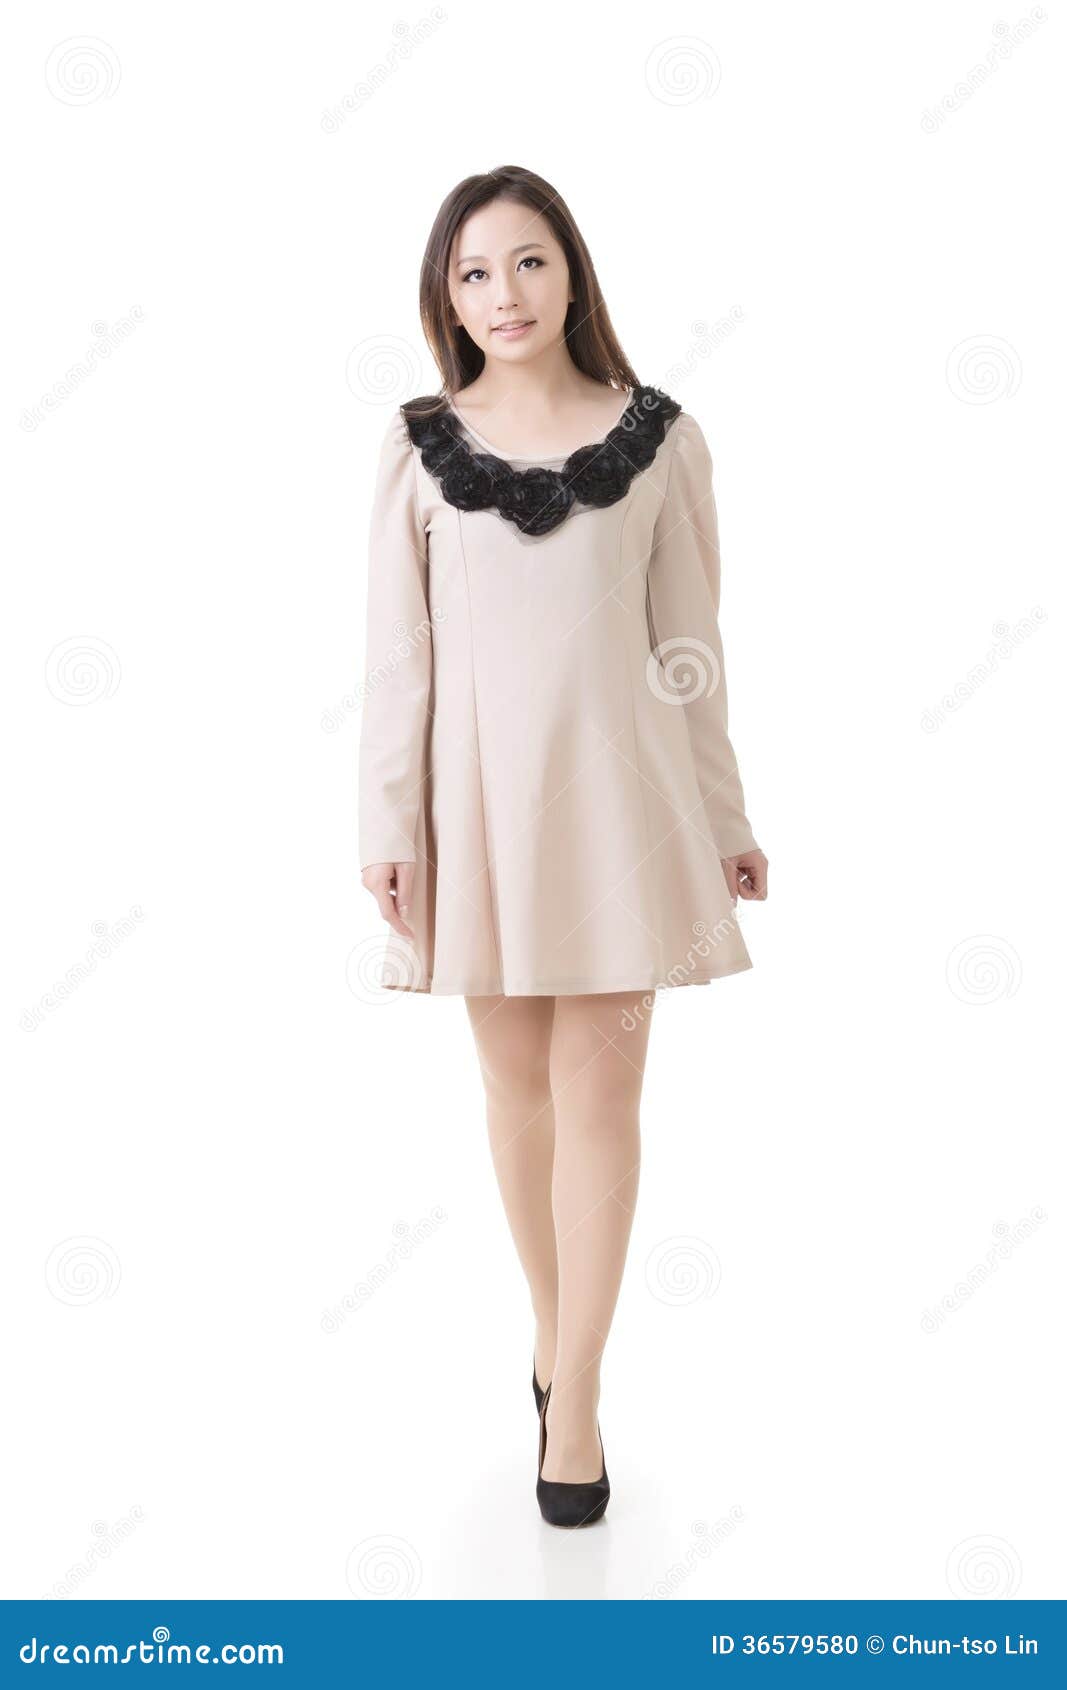 https://thumbs.dreamstime.com/z/charming-asian-woman-full-length-portrait-isolated-white-background-36579580.jpg